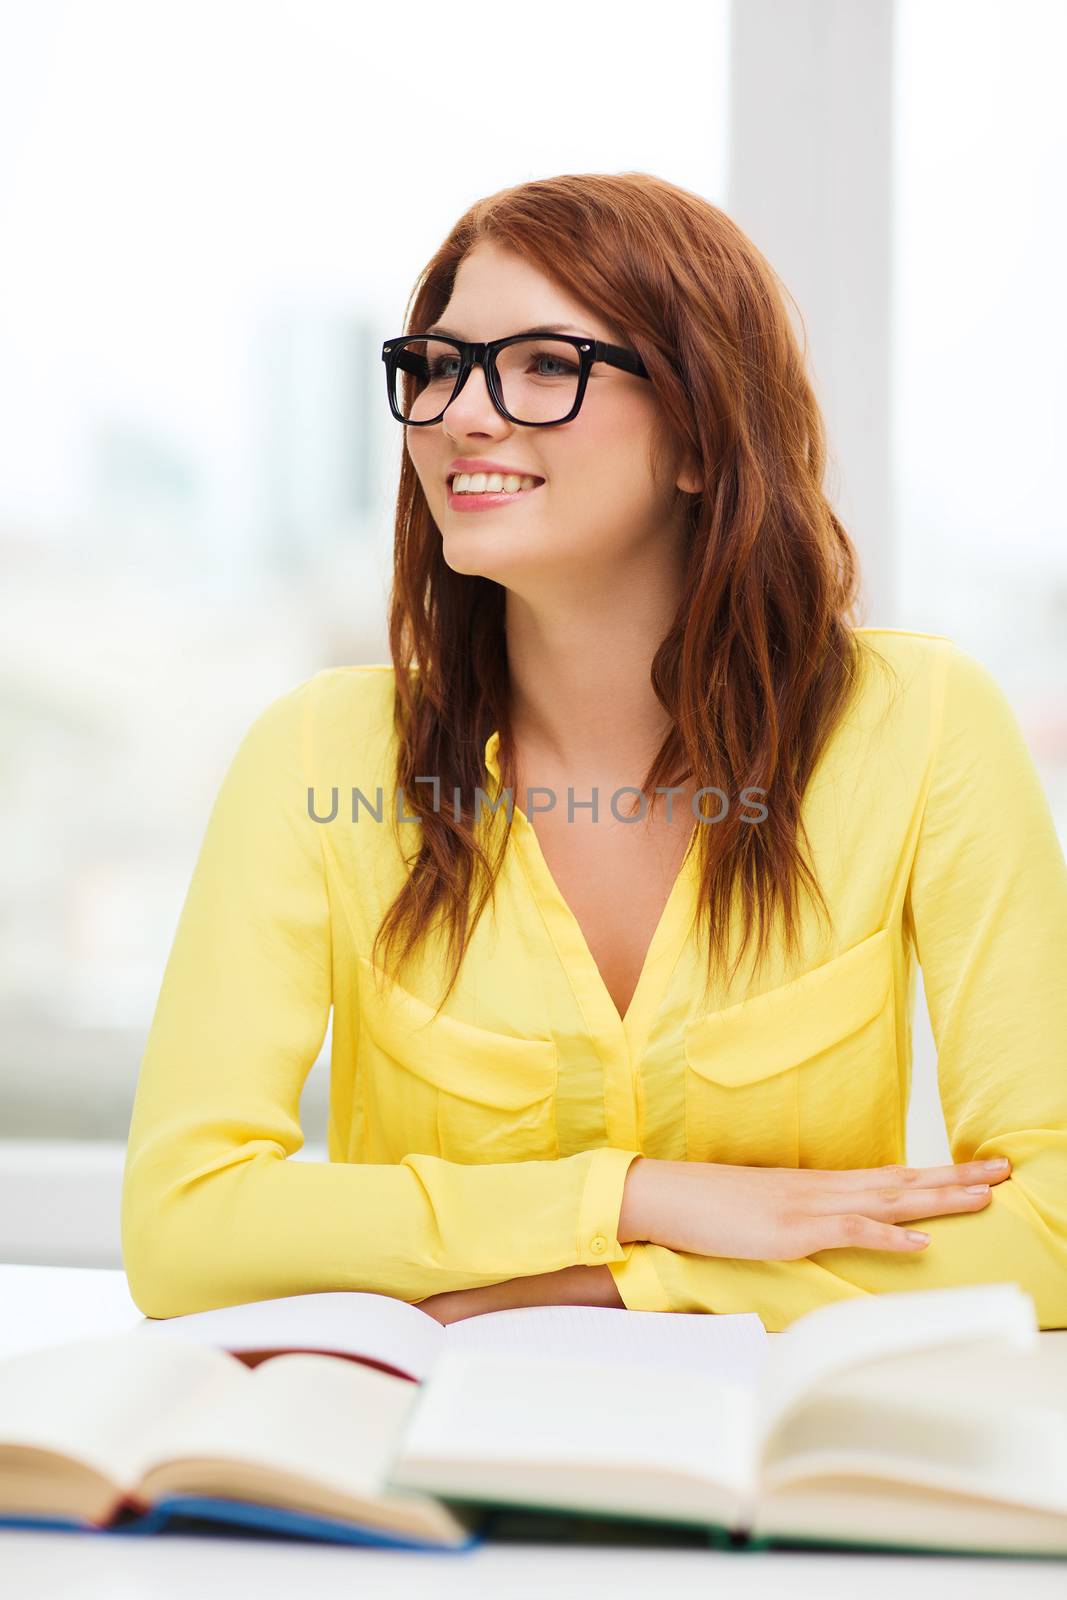 education concept - smiling student girl in eyeglasses listening lecture in college